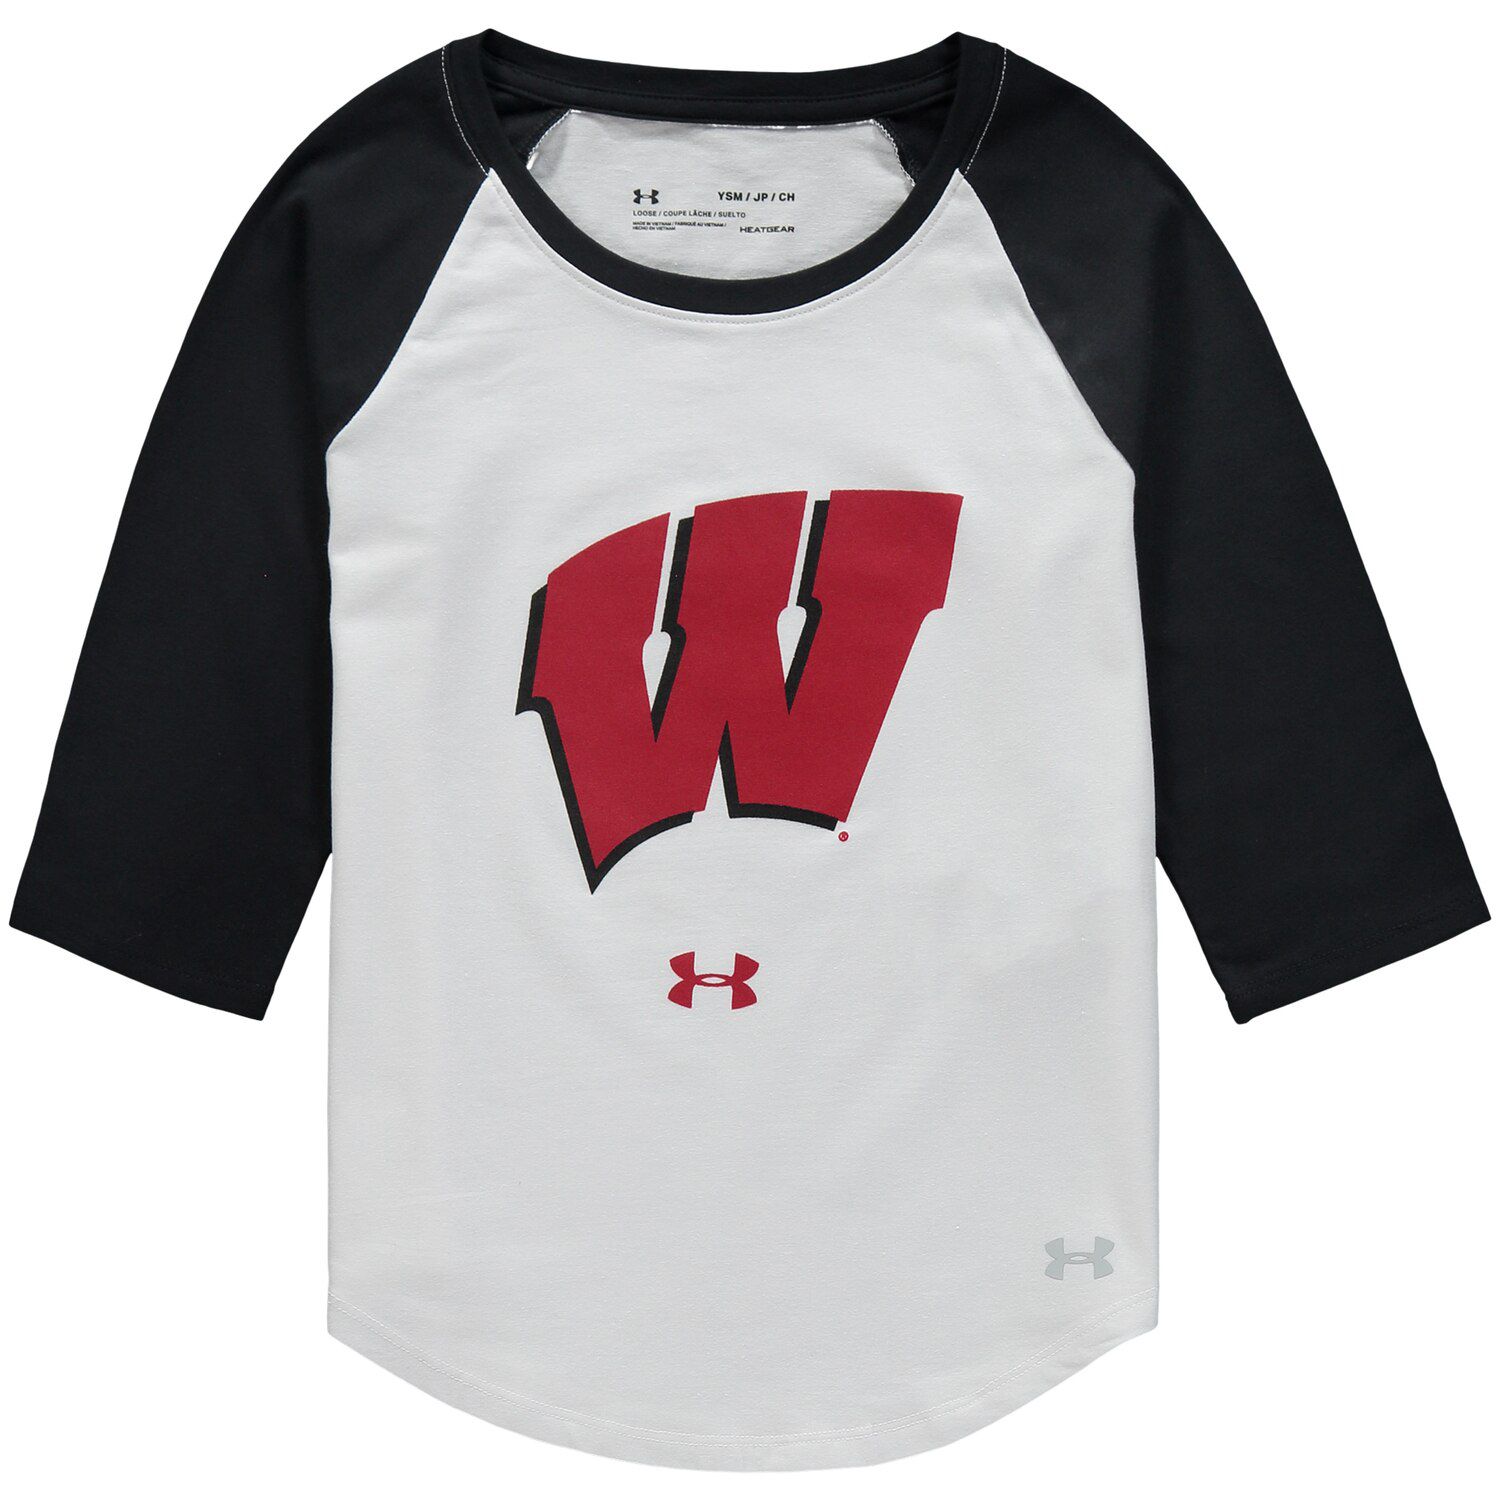 white under armour shirt youth